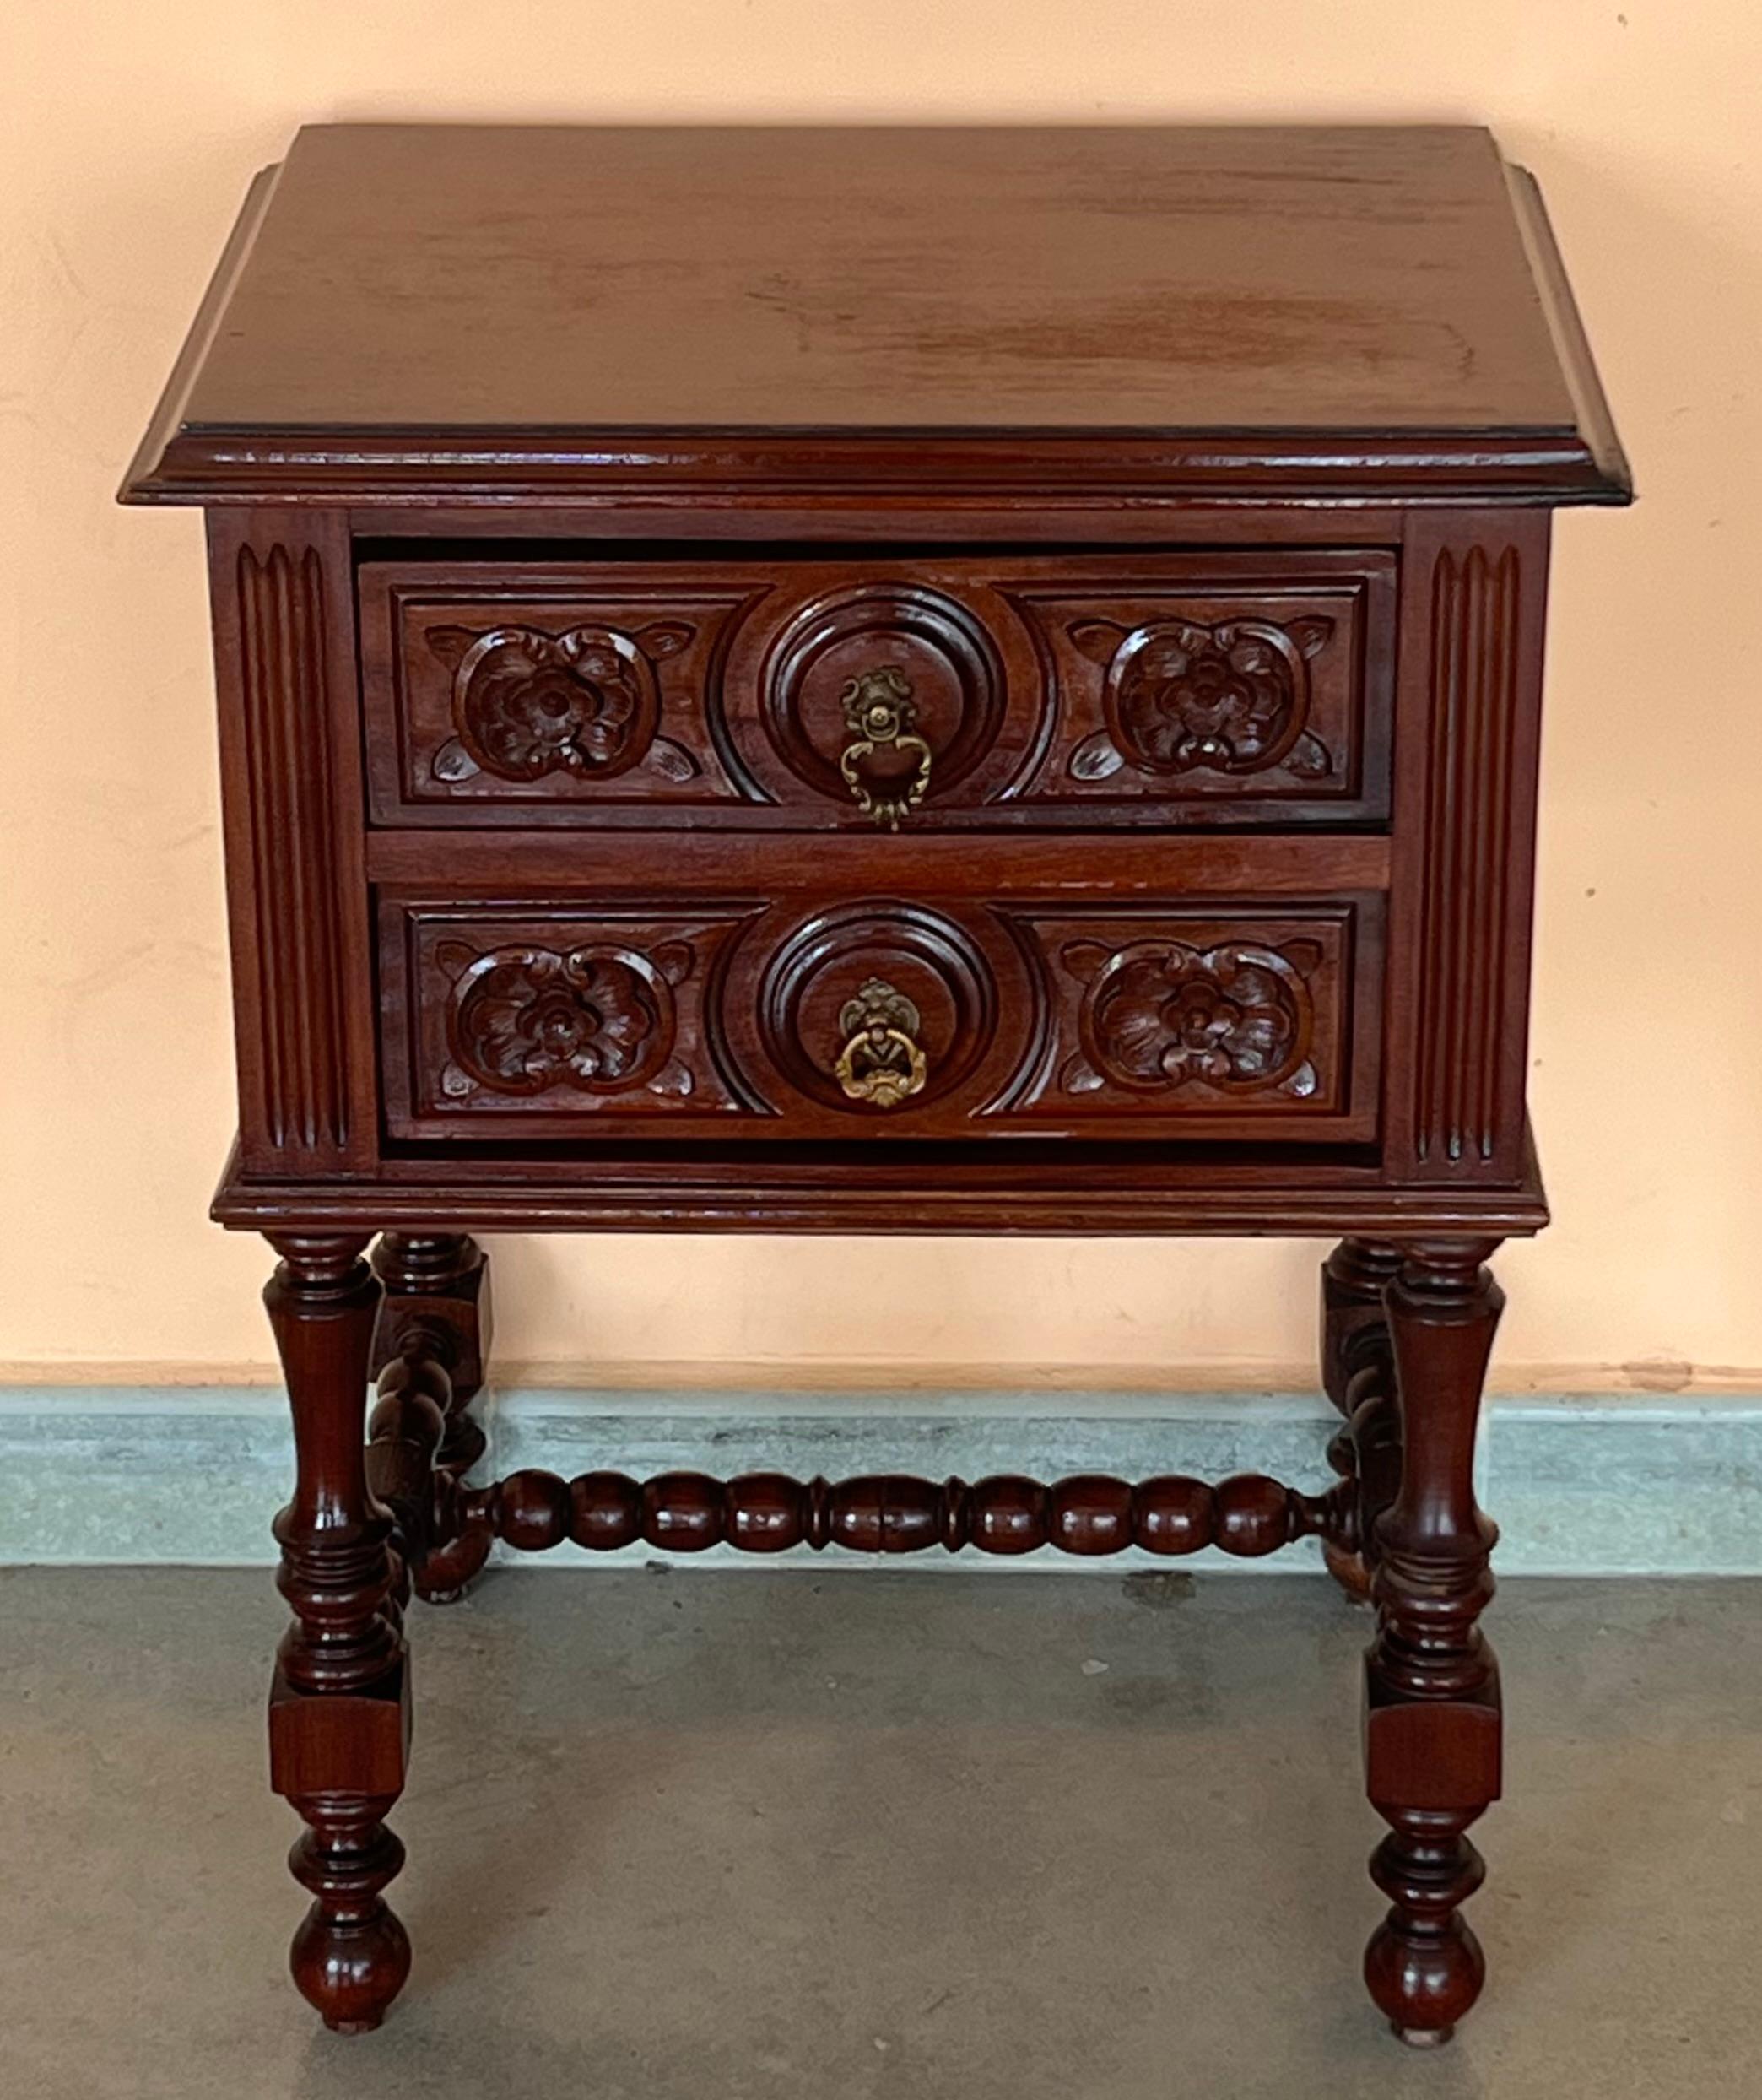 A French chestnut two-drawer commode from the late-19th century with ribbon-carved moldings and carved skirt. This petite French commode features a rectangular top with beveled edges, sitting above two exquisite drawers, each simply adorned with a